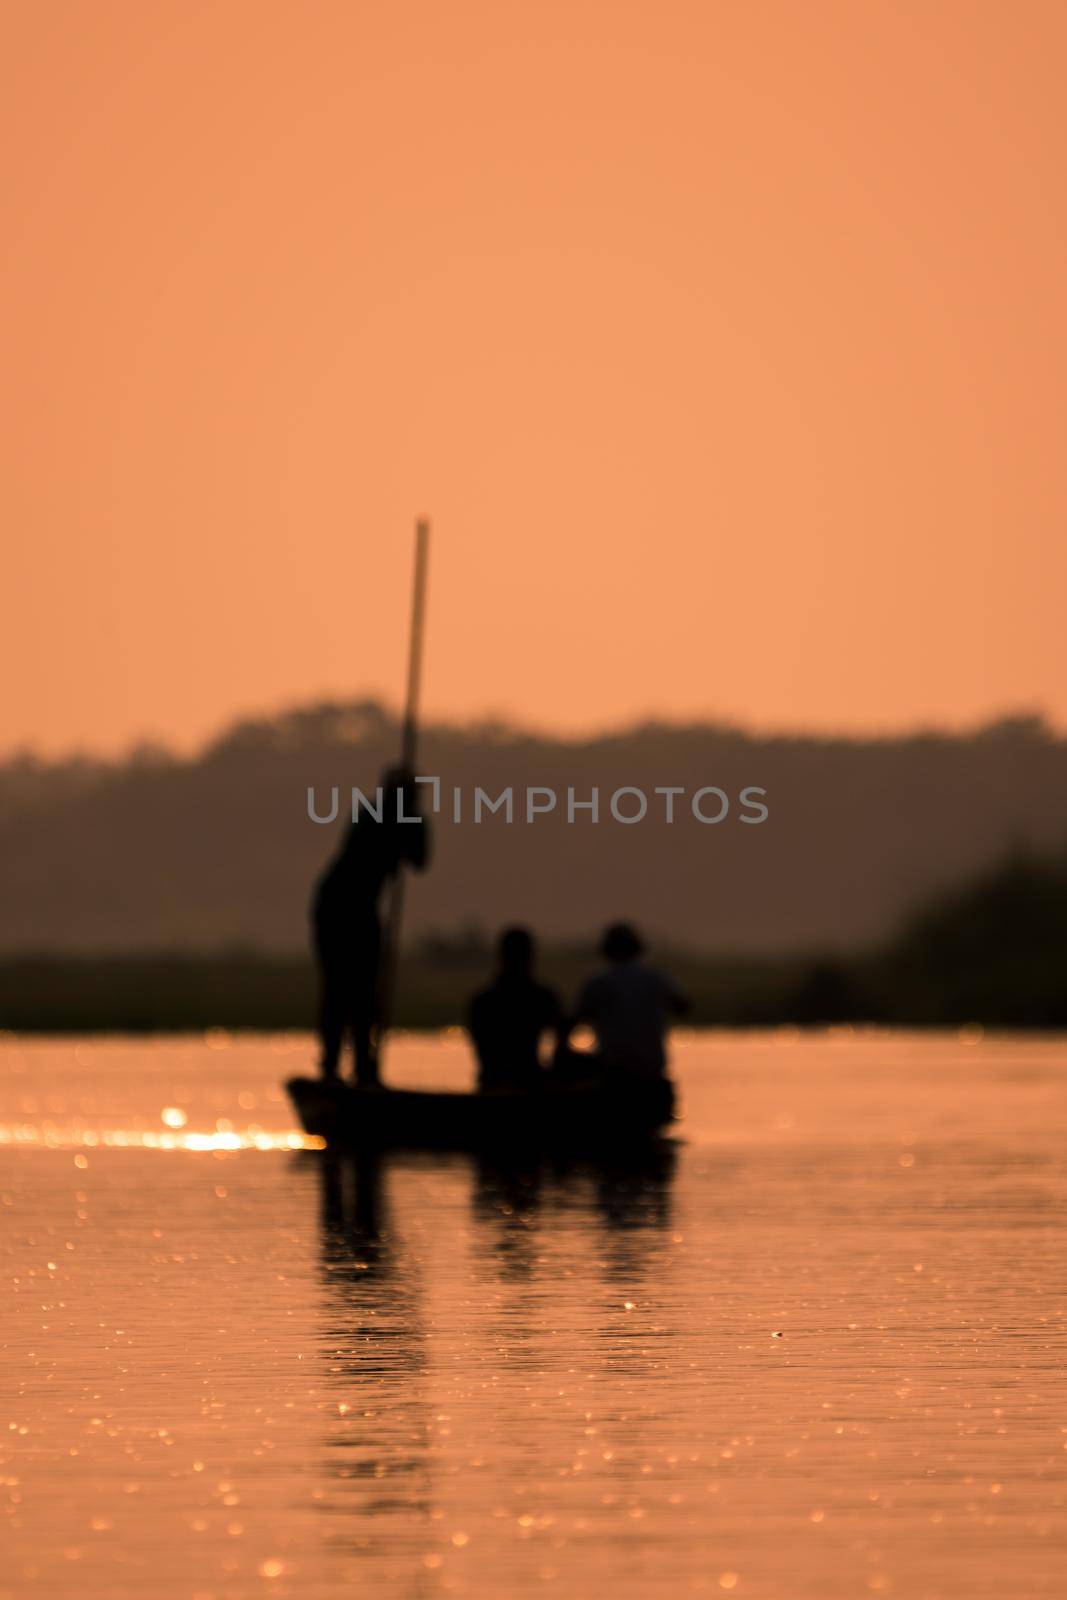 Blurred Men in a boat on a river silhouette with sunset light. Artistic blur